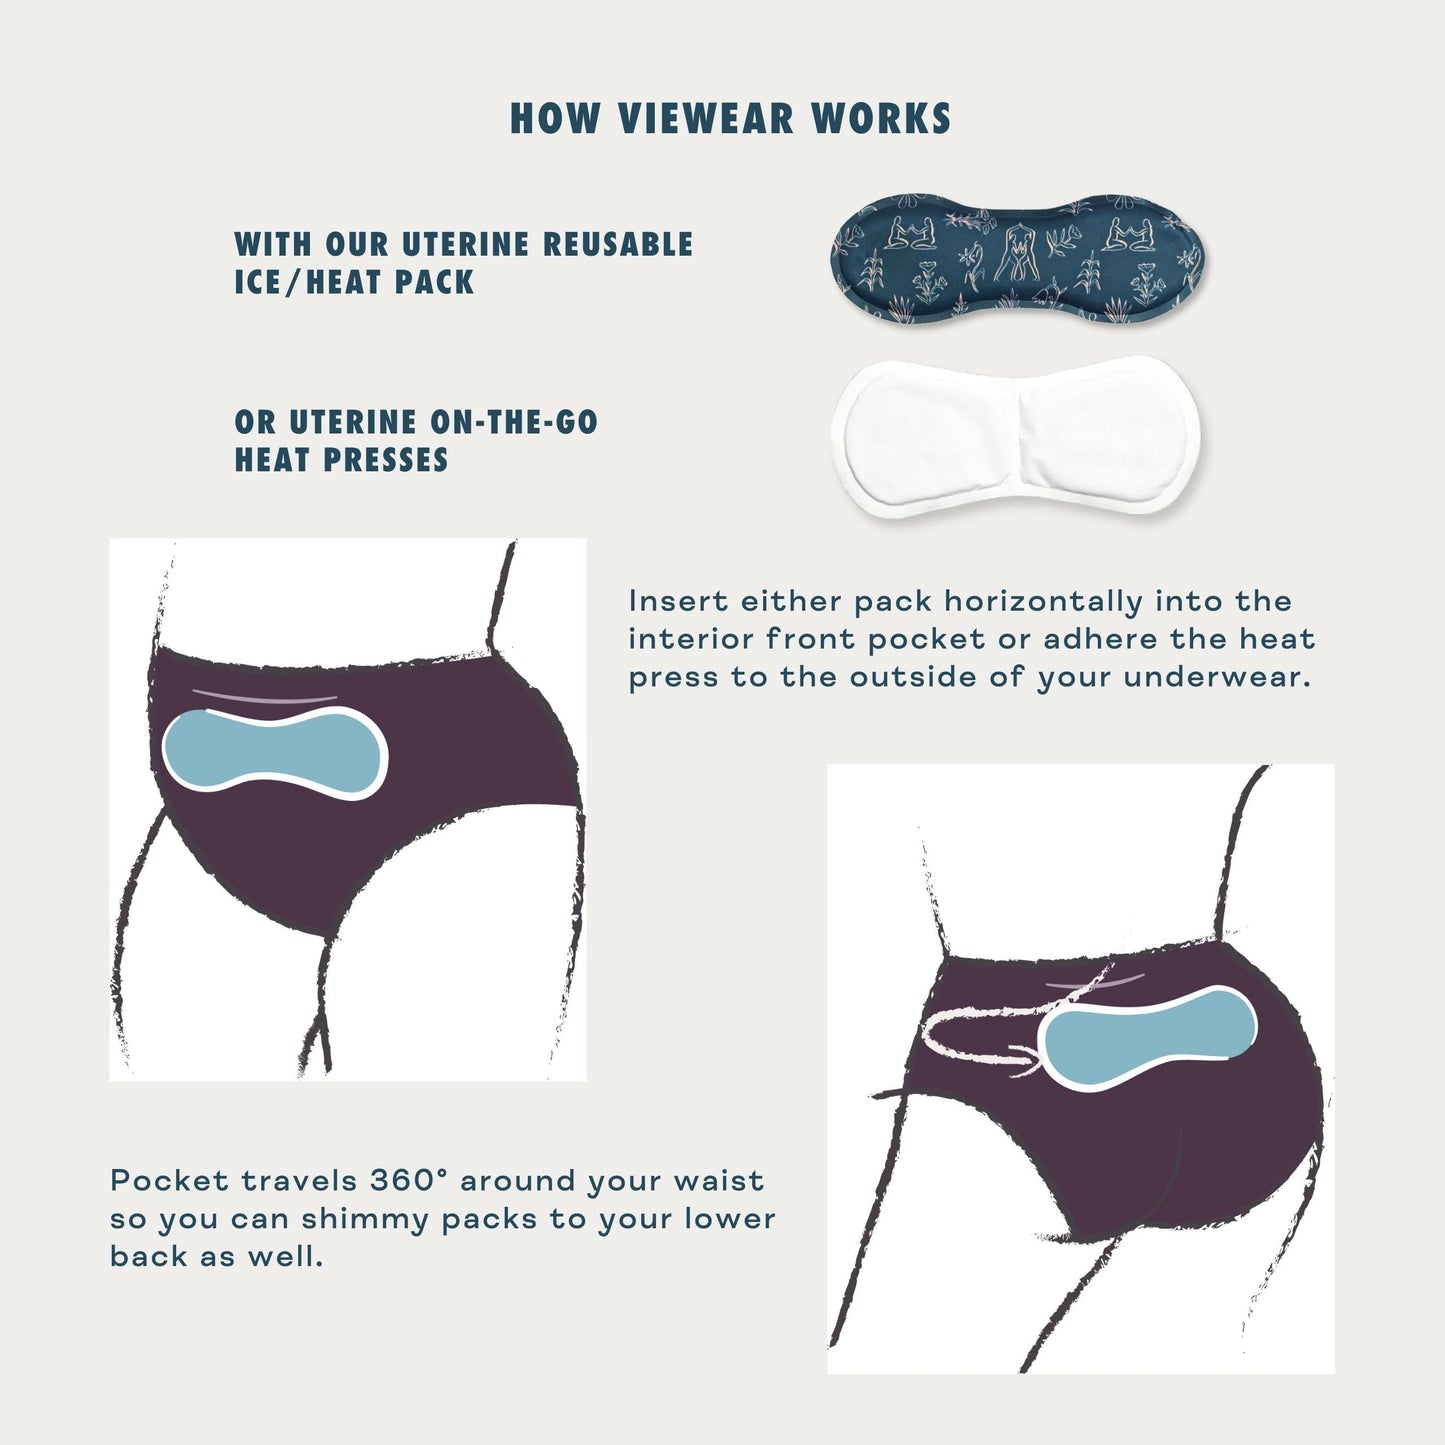 Infographic on How VieWear Works